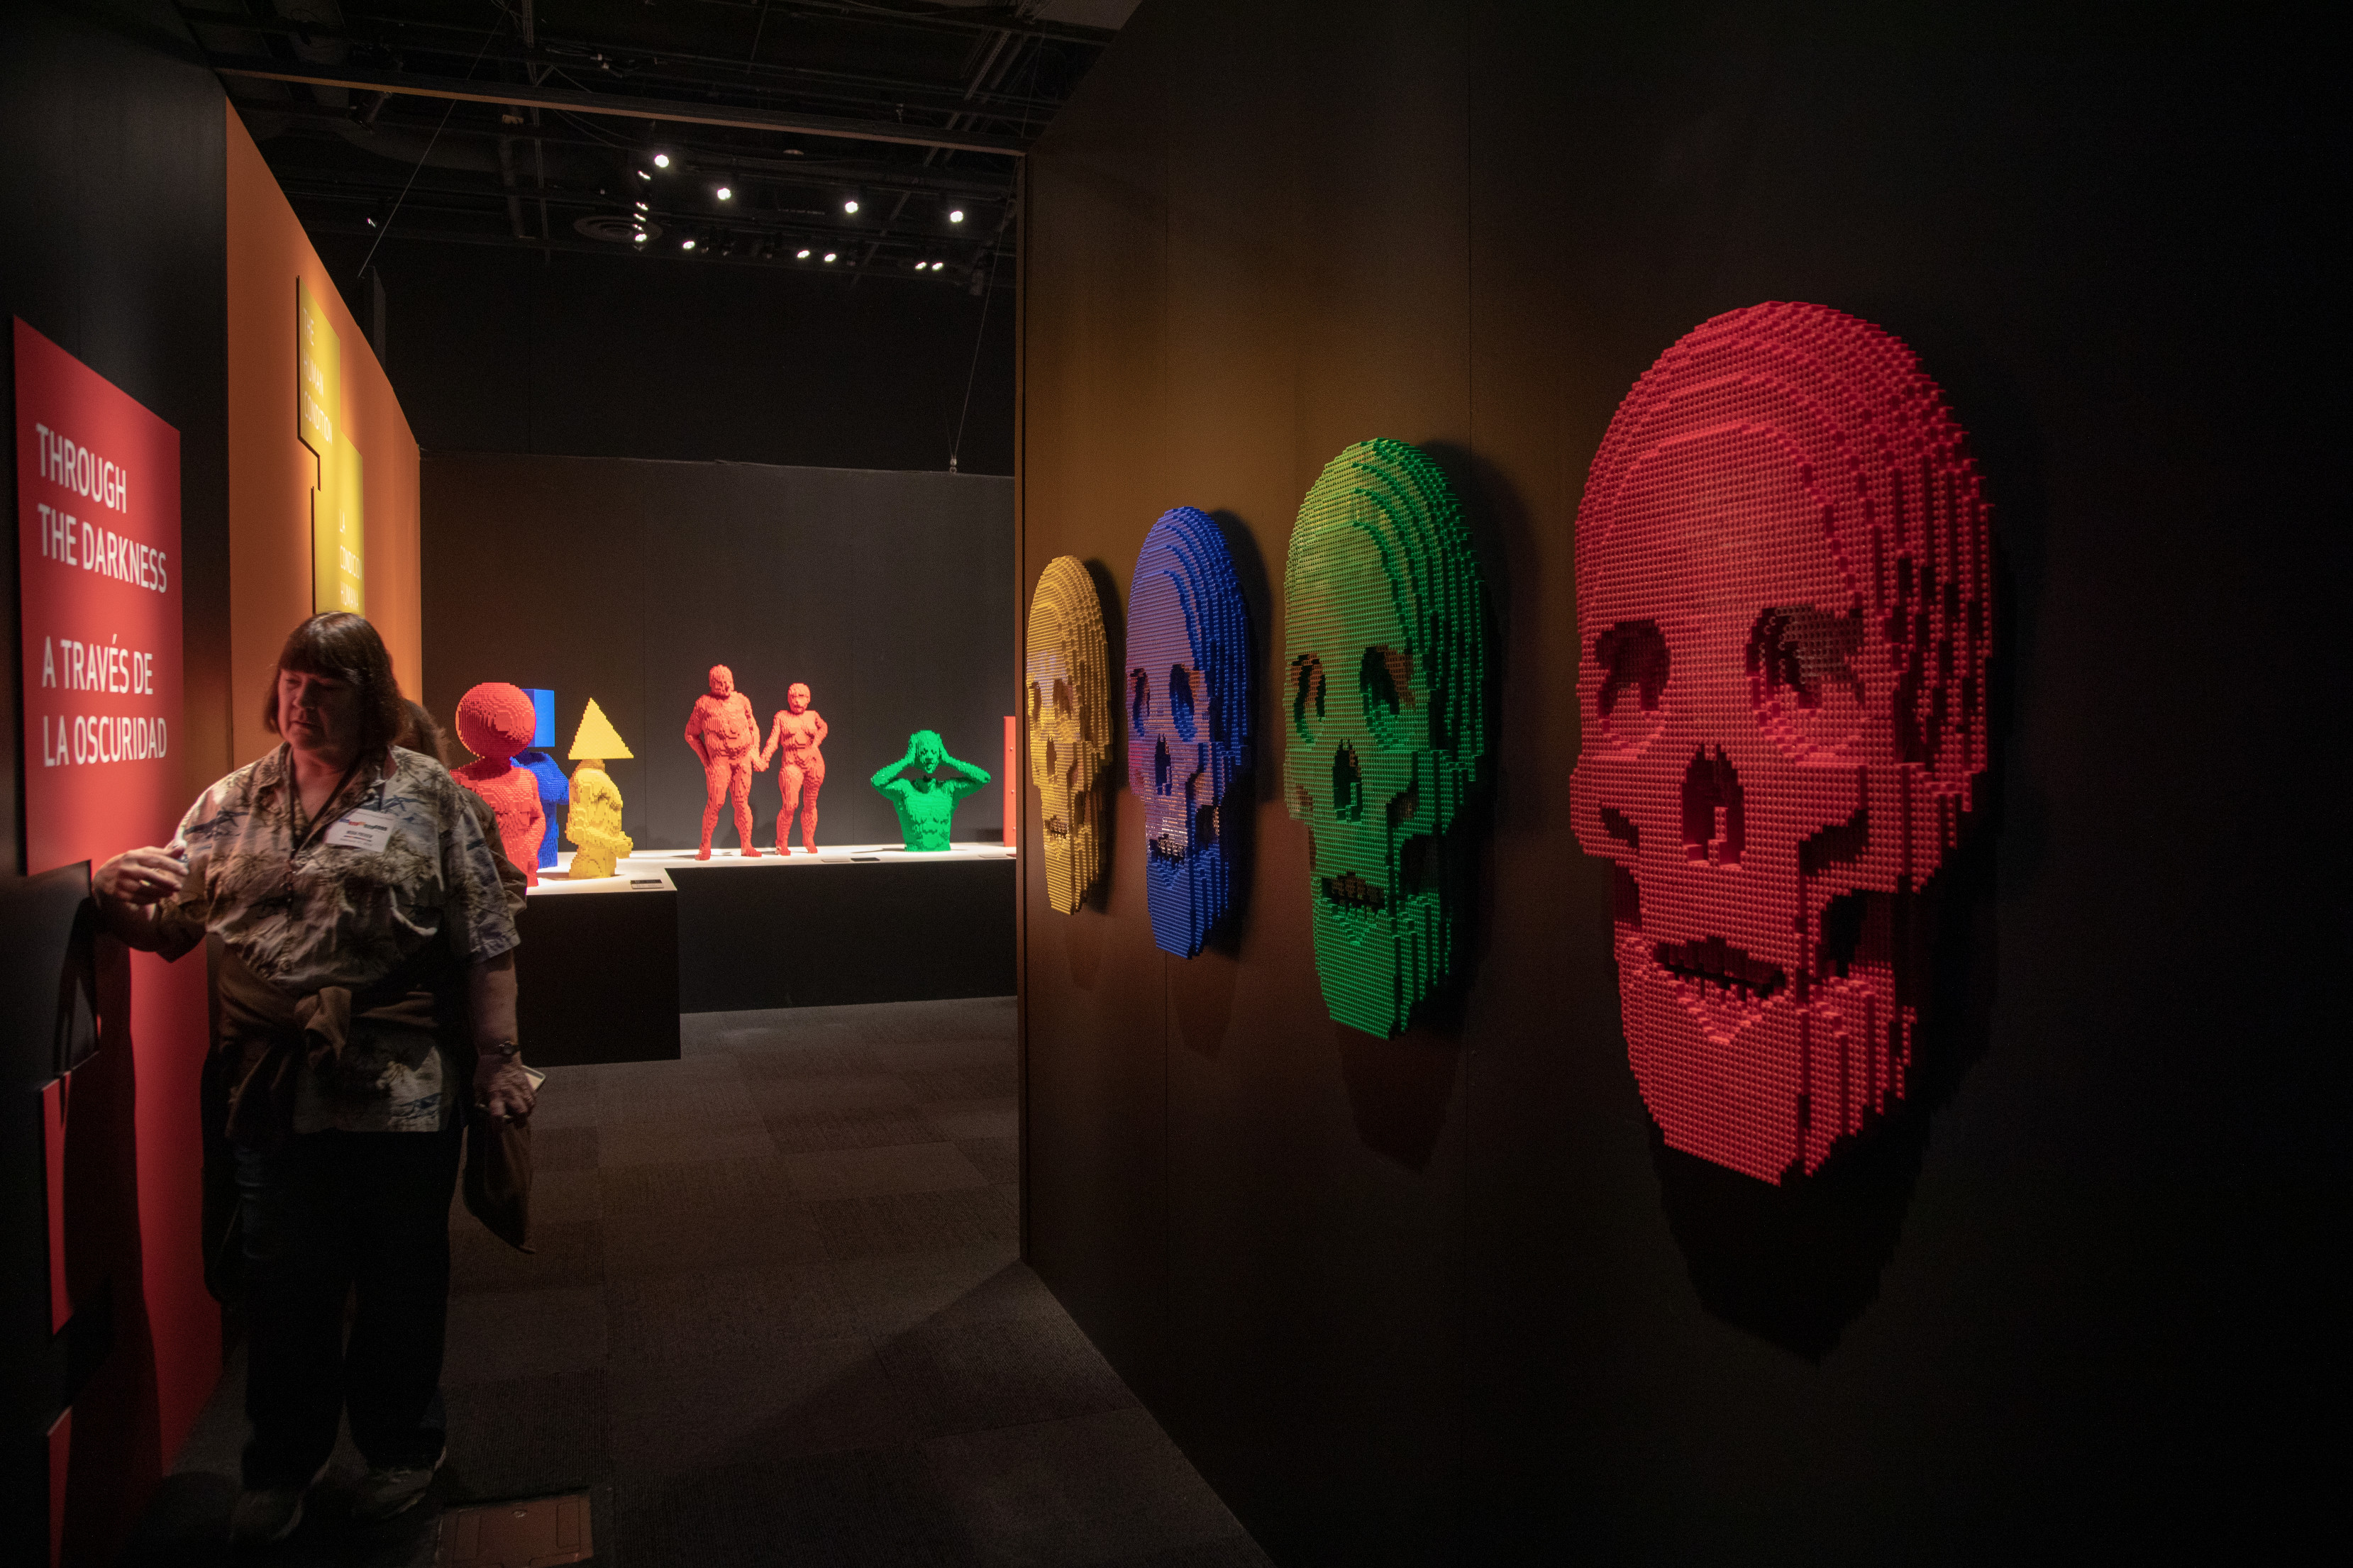 Skulls adorn the walls in the “Through the Darkness” gallery of The Art of the Brick traveling exhibition (PHOTO CREDIT: JerSean Golatt/Perot Museum of Nature and Science)